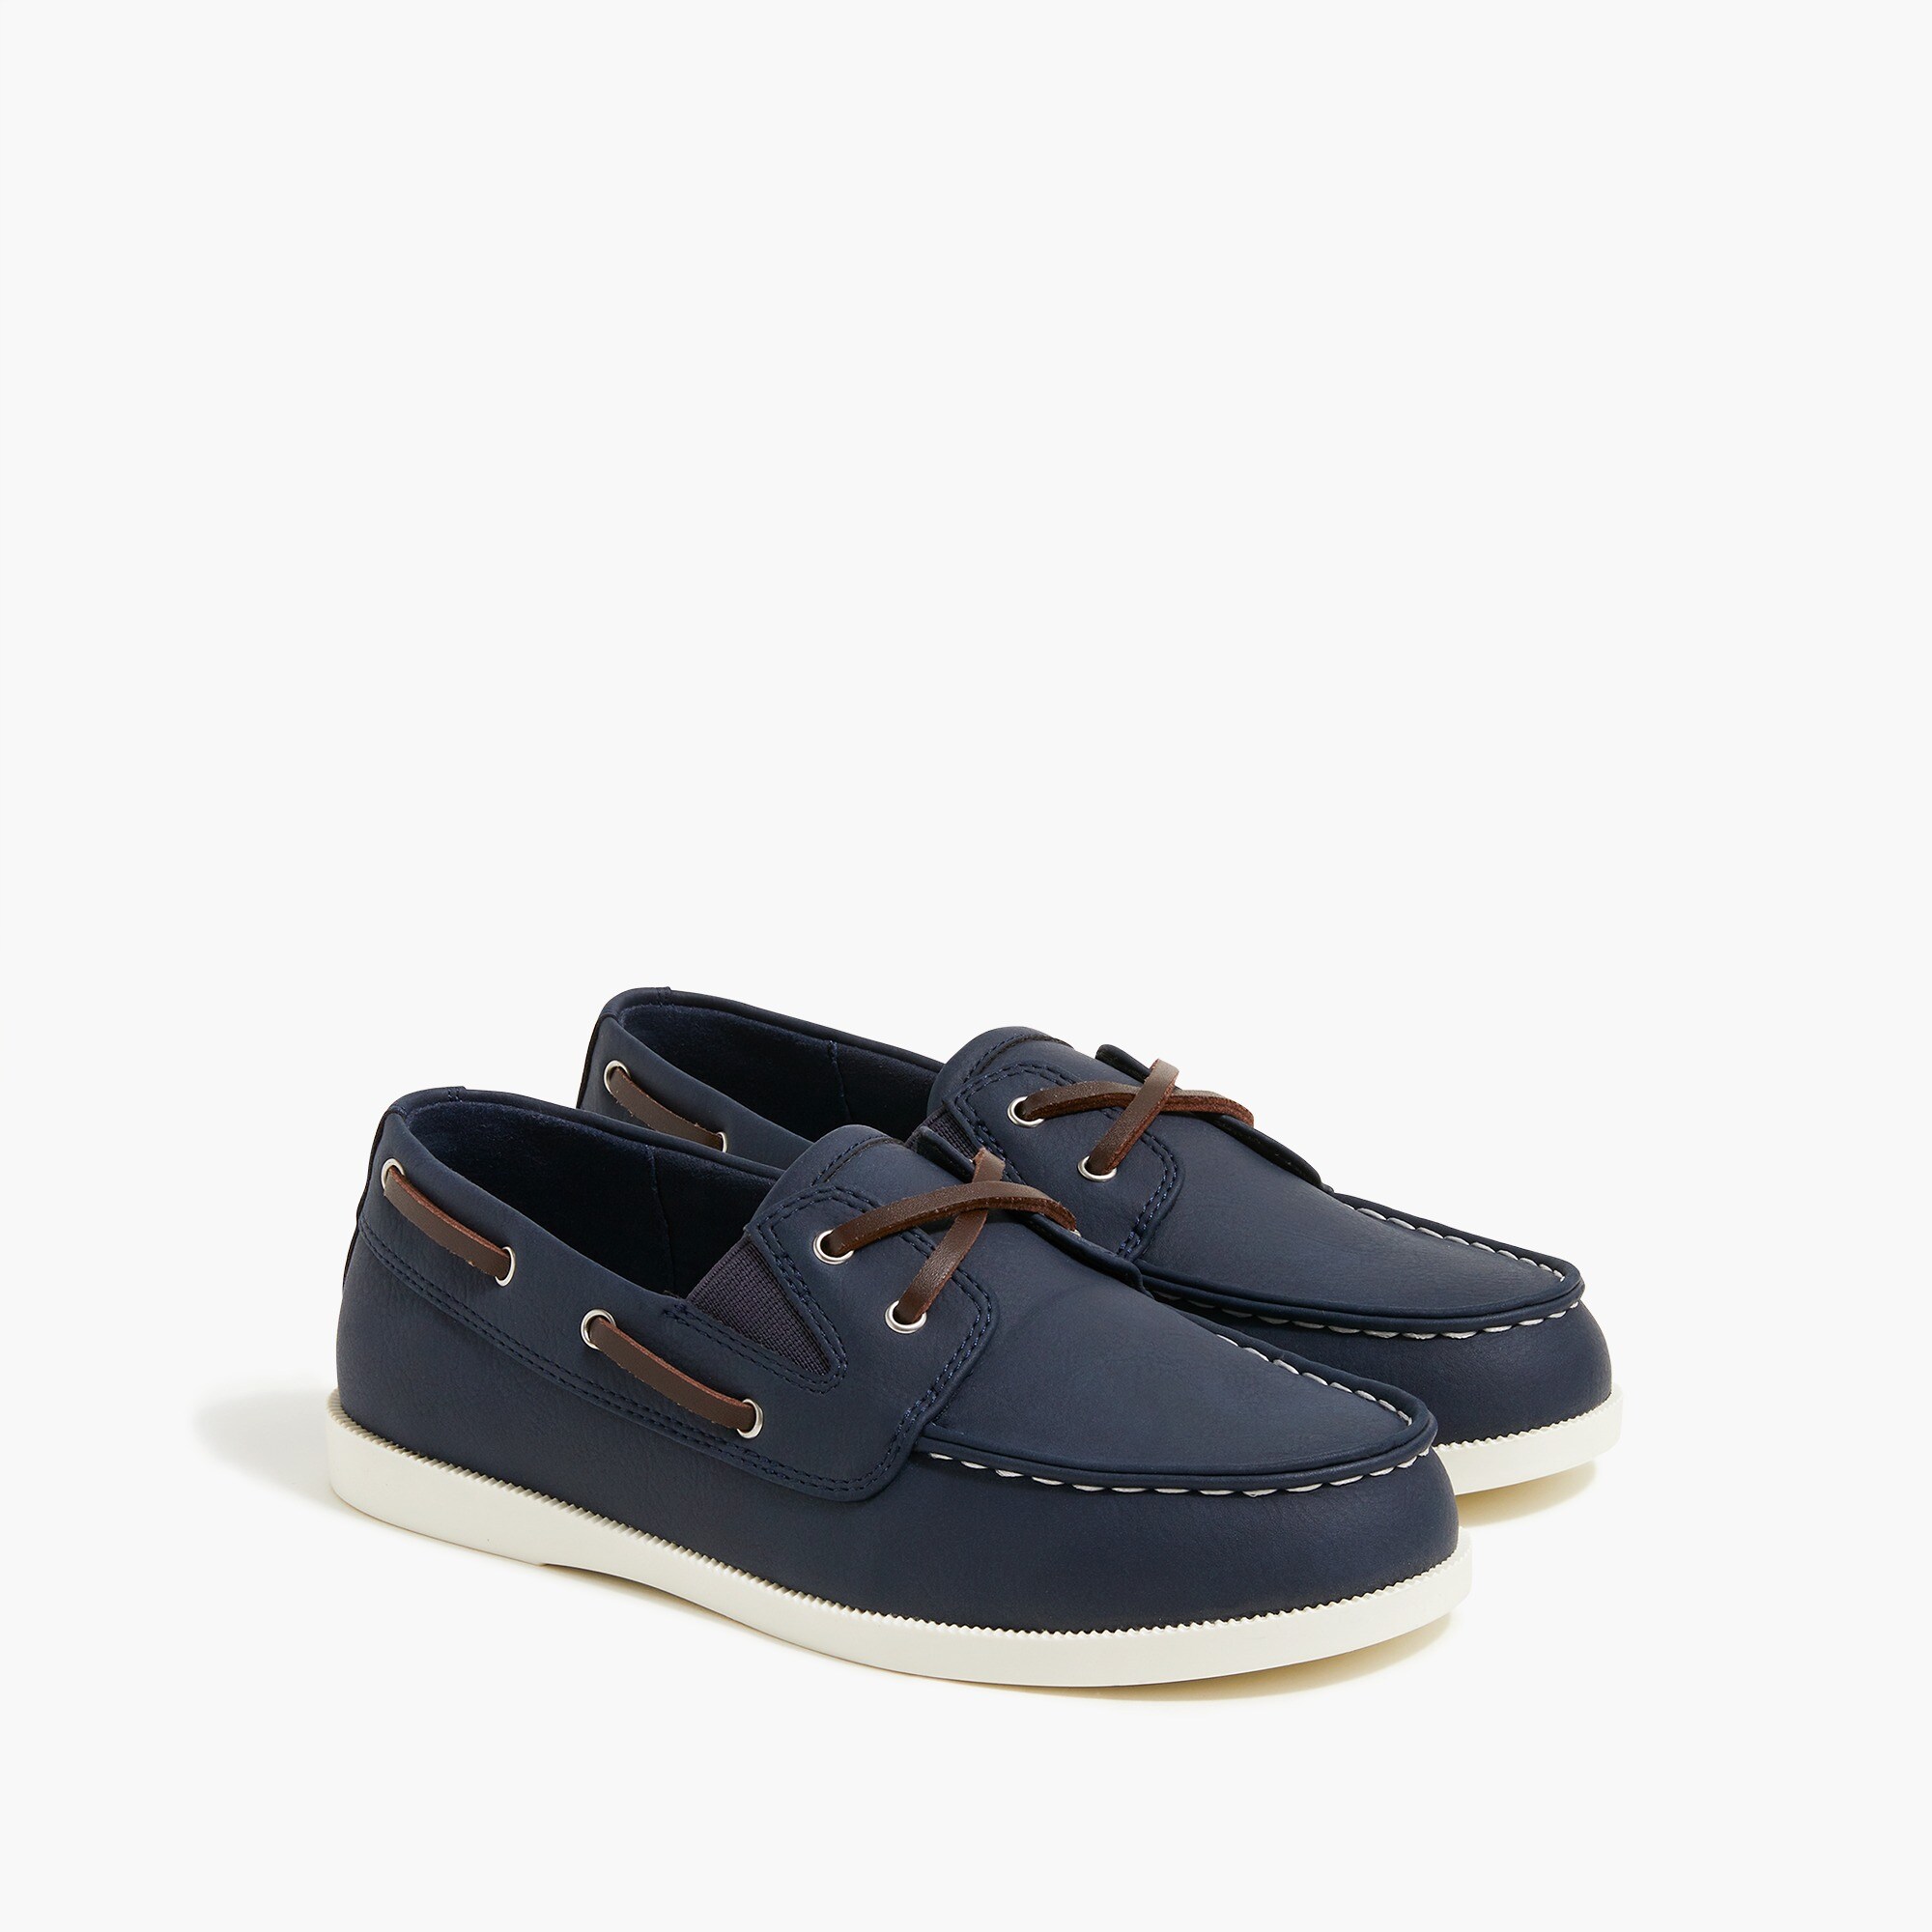  Kids' boat shoes